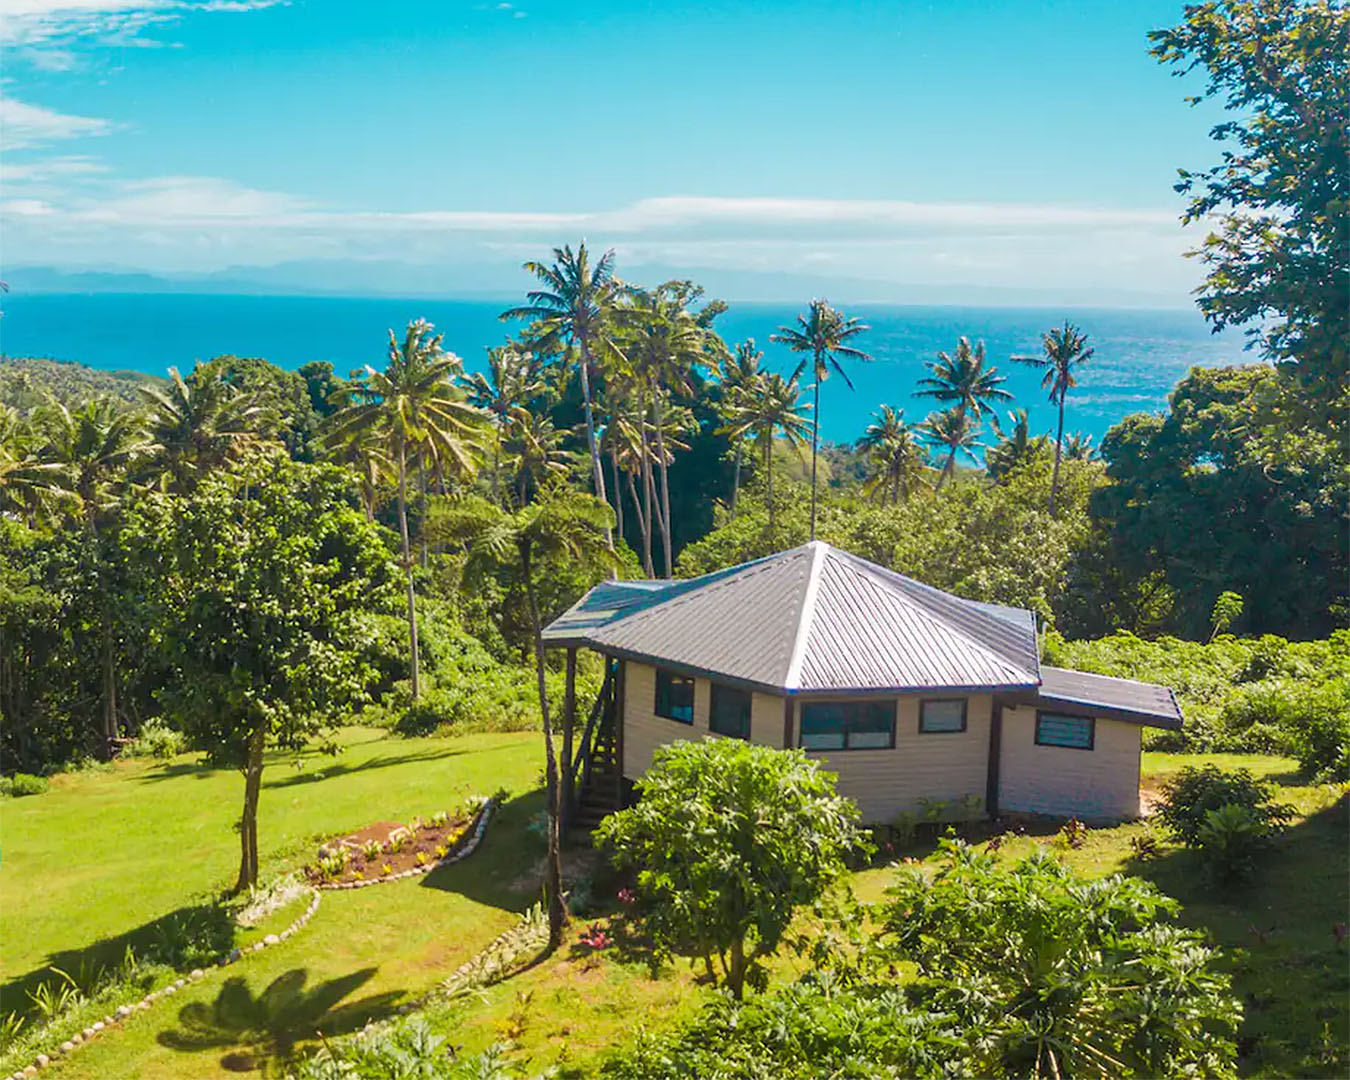 The darling little Vakanananu Retreat with palm trees and the blue sea behind.